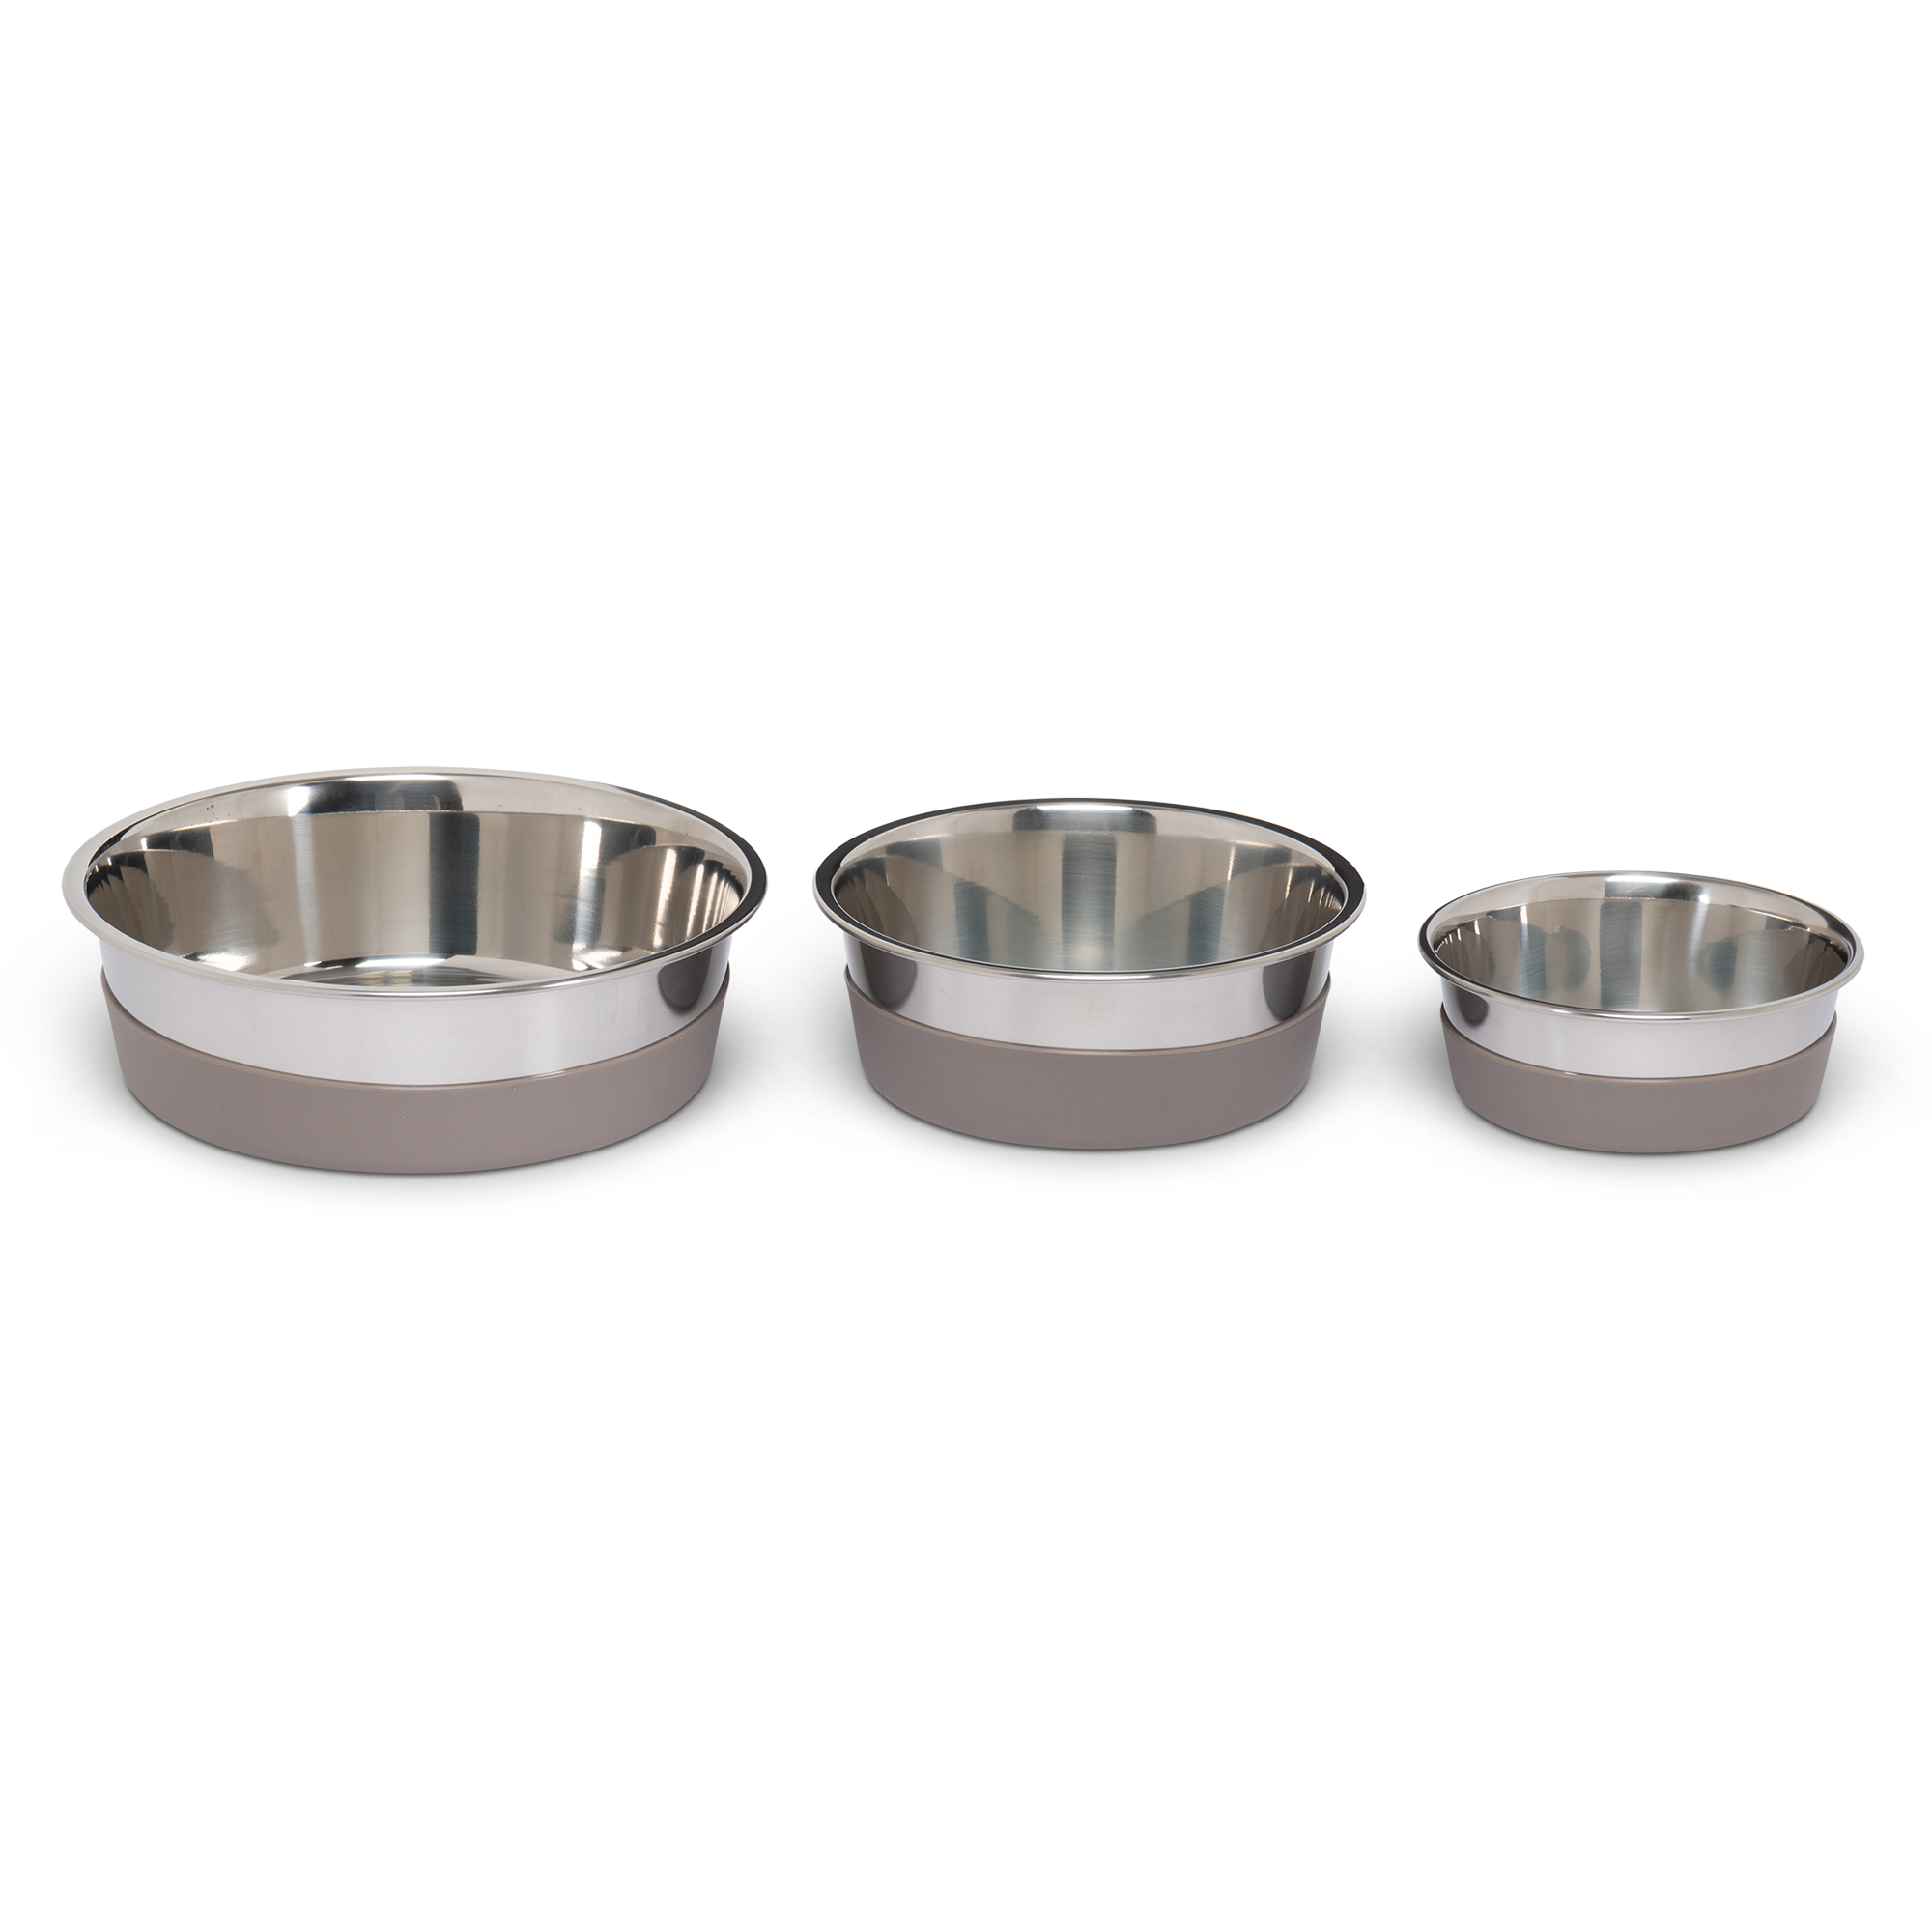 Messy Mutts Stainless Steel Bowl with Non-Slip Removable Silicone Base